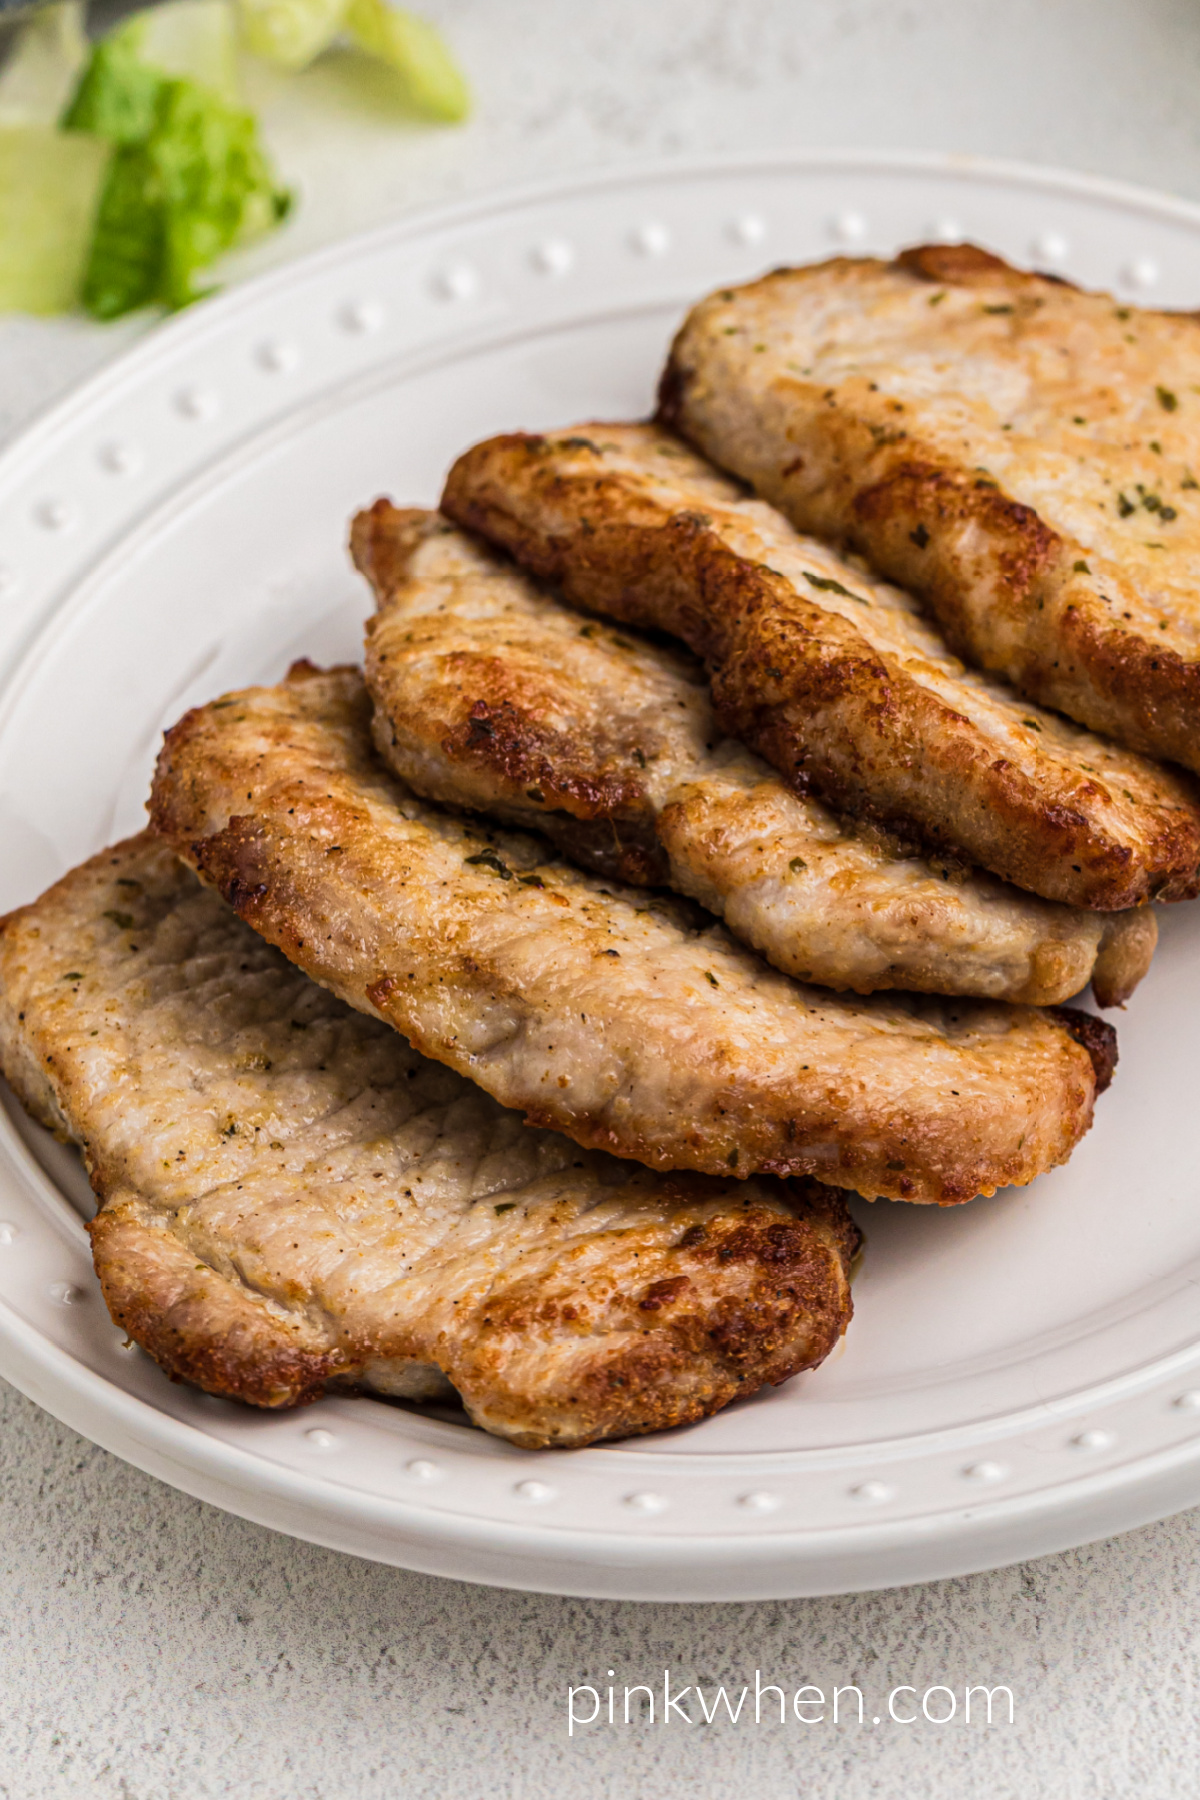 Cooked pork chops without breading on a white dish ready to serve.